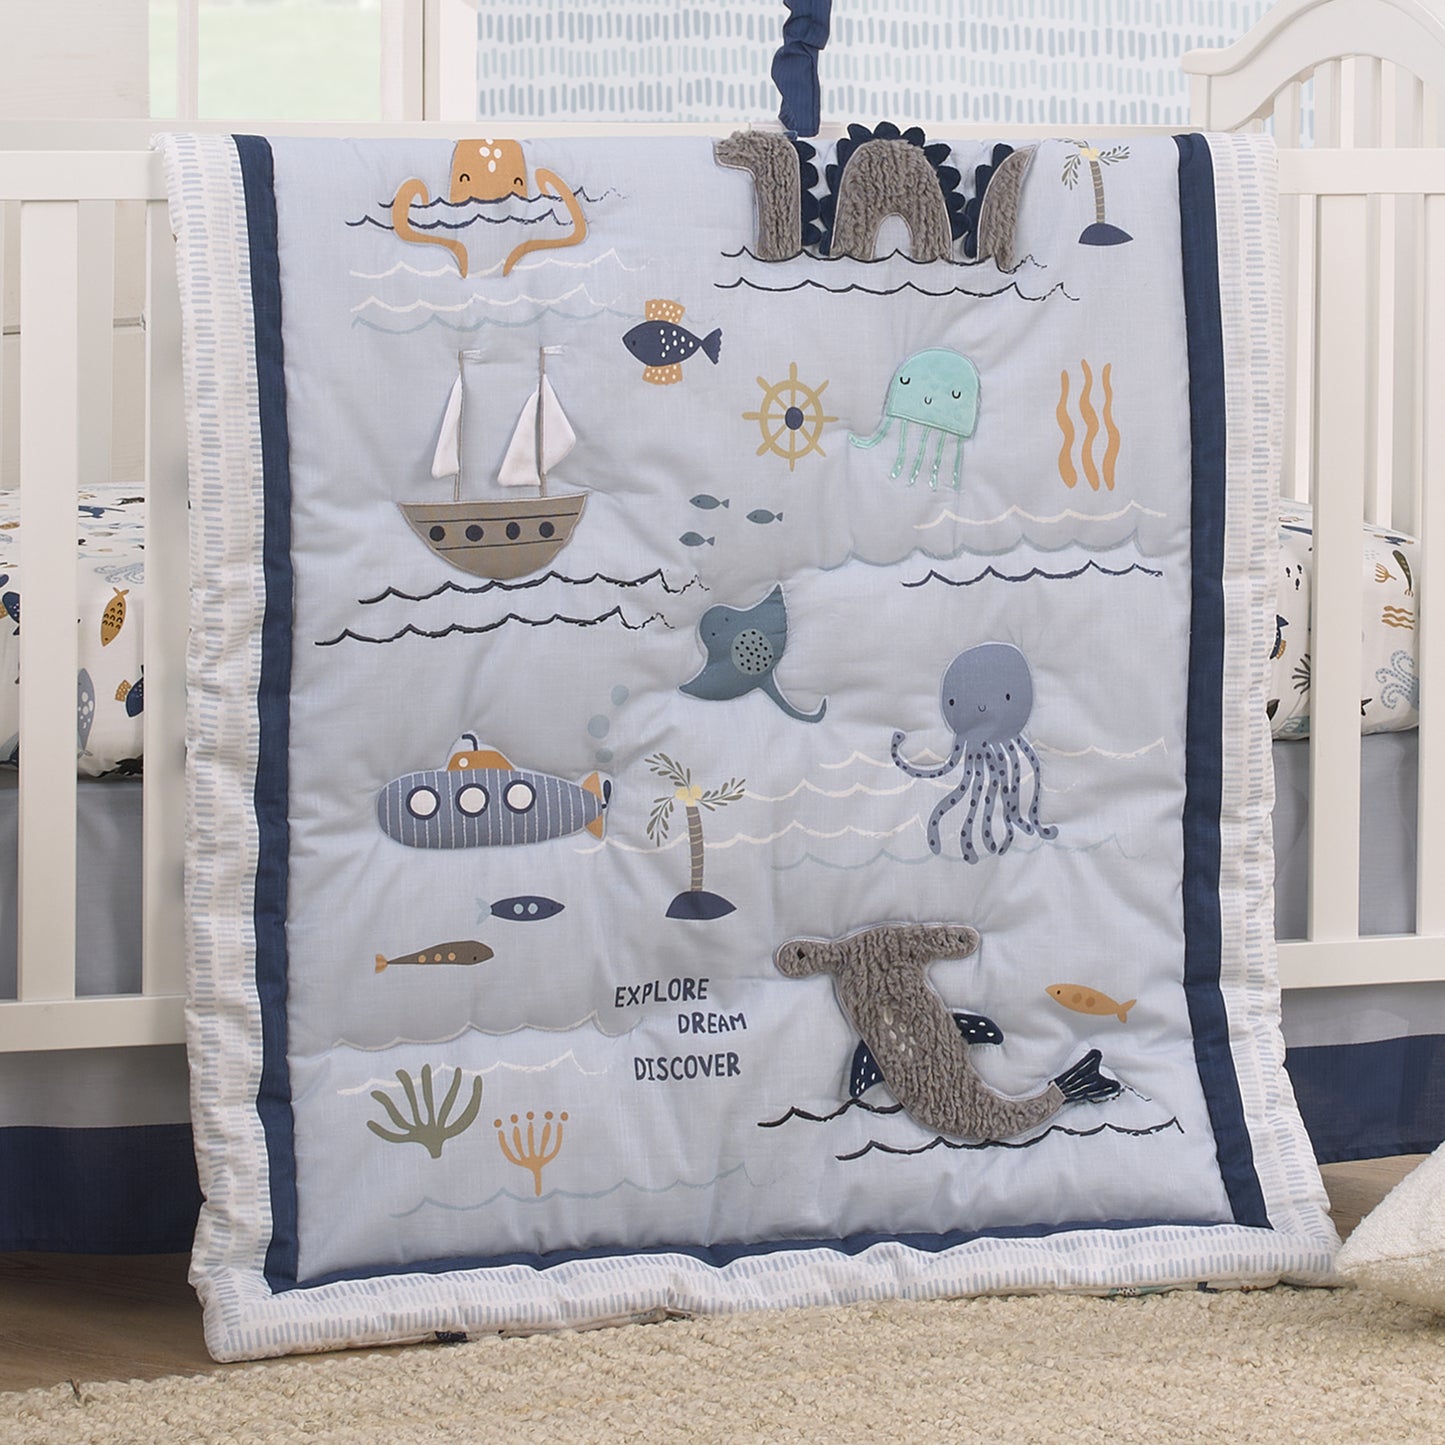 NoJo Explore Dream Discover Light Blue, Navy, Gray and Coral Ocean 4 Piece Nursery Crib Bedding Set - Comforter, 100% Cotton Fitted Crib Sheet, Crib Skirt and Nursery Organizer